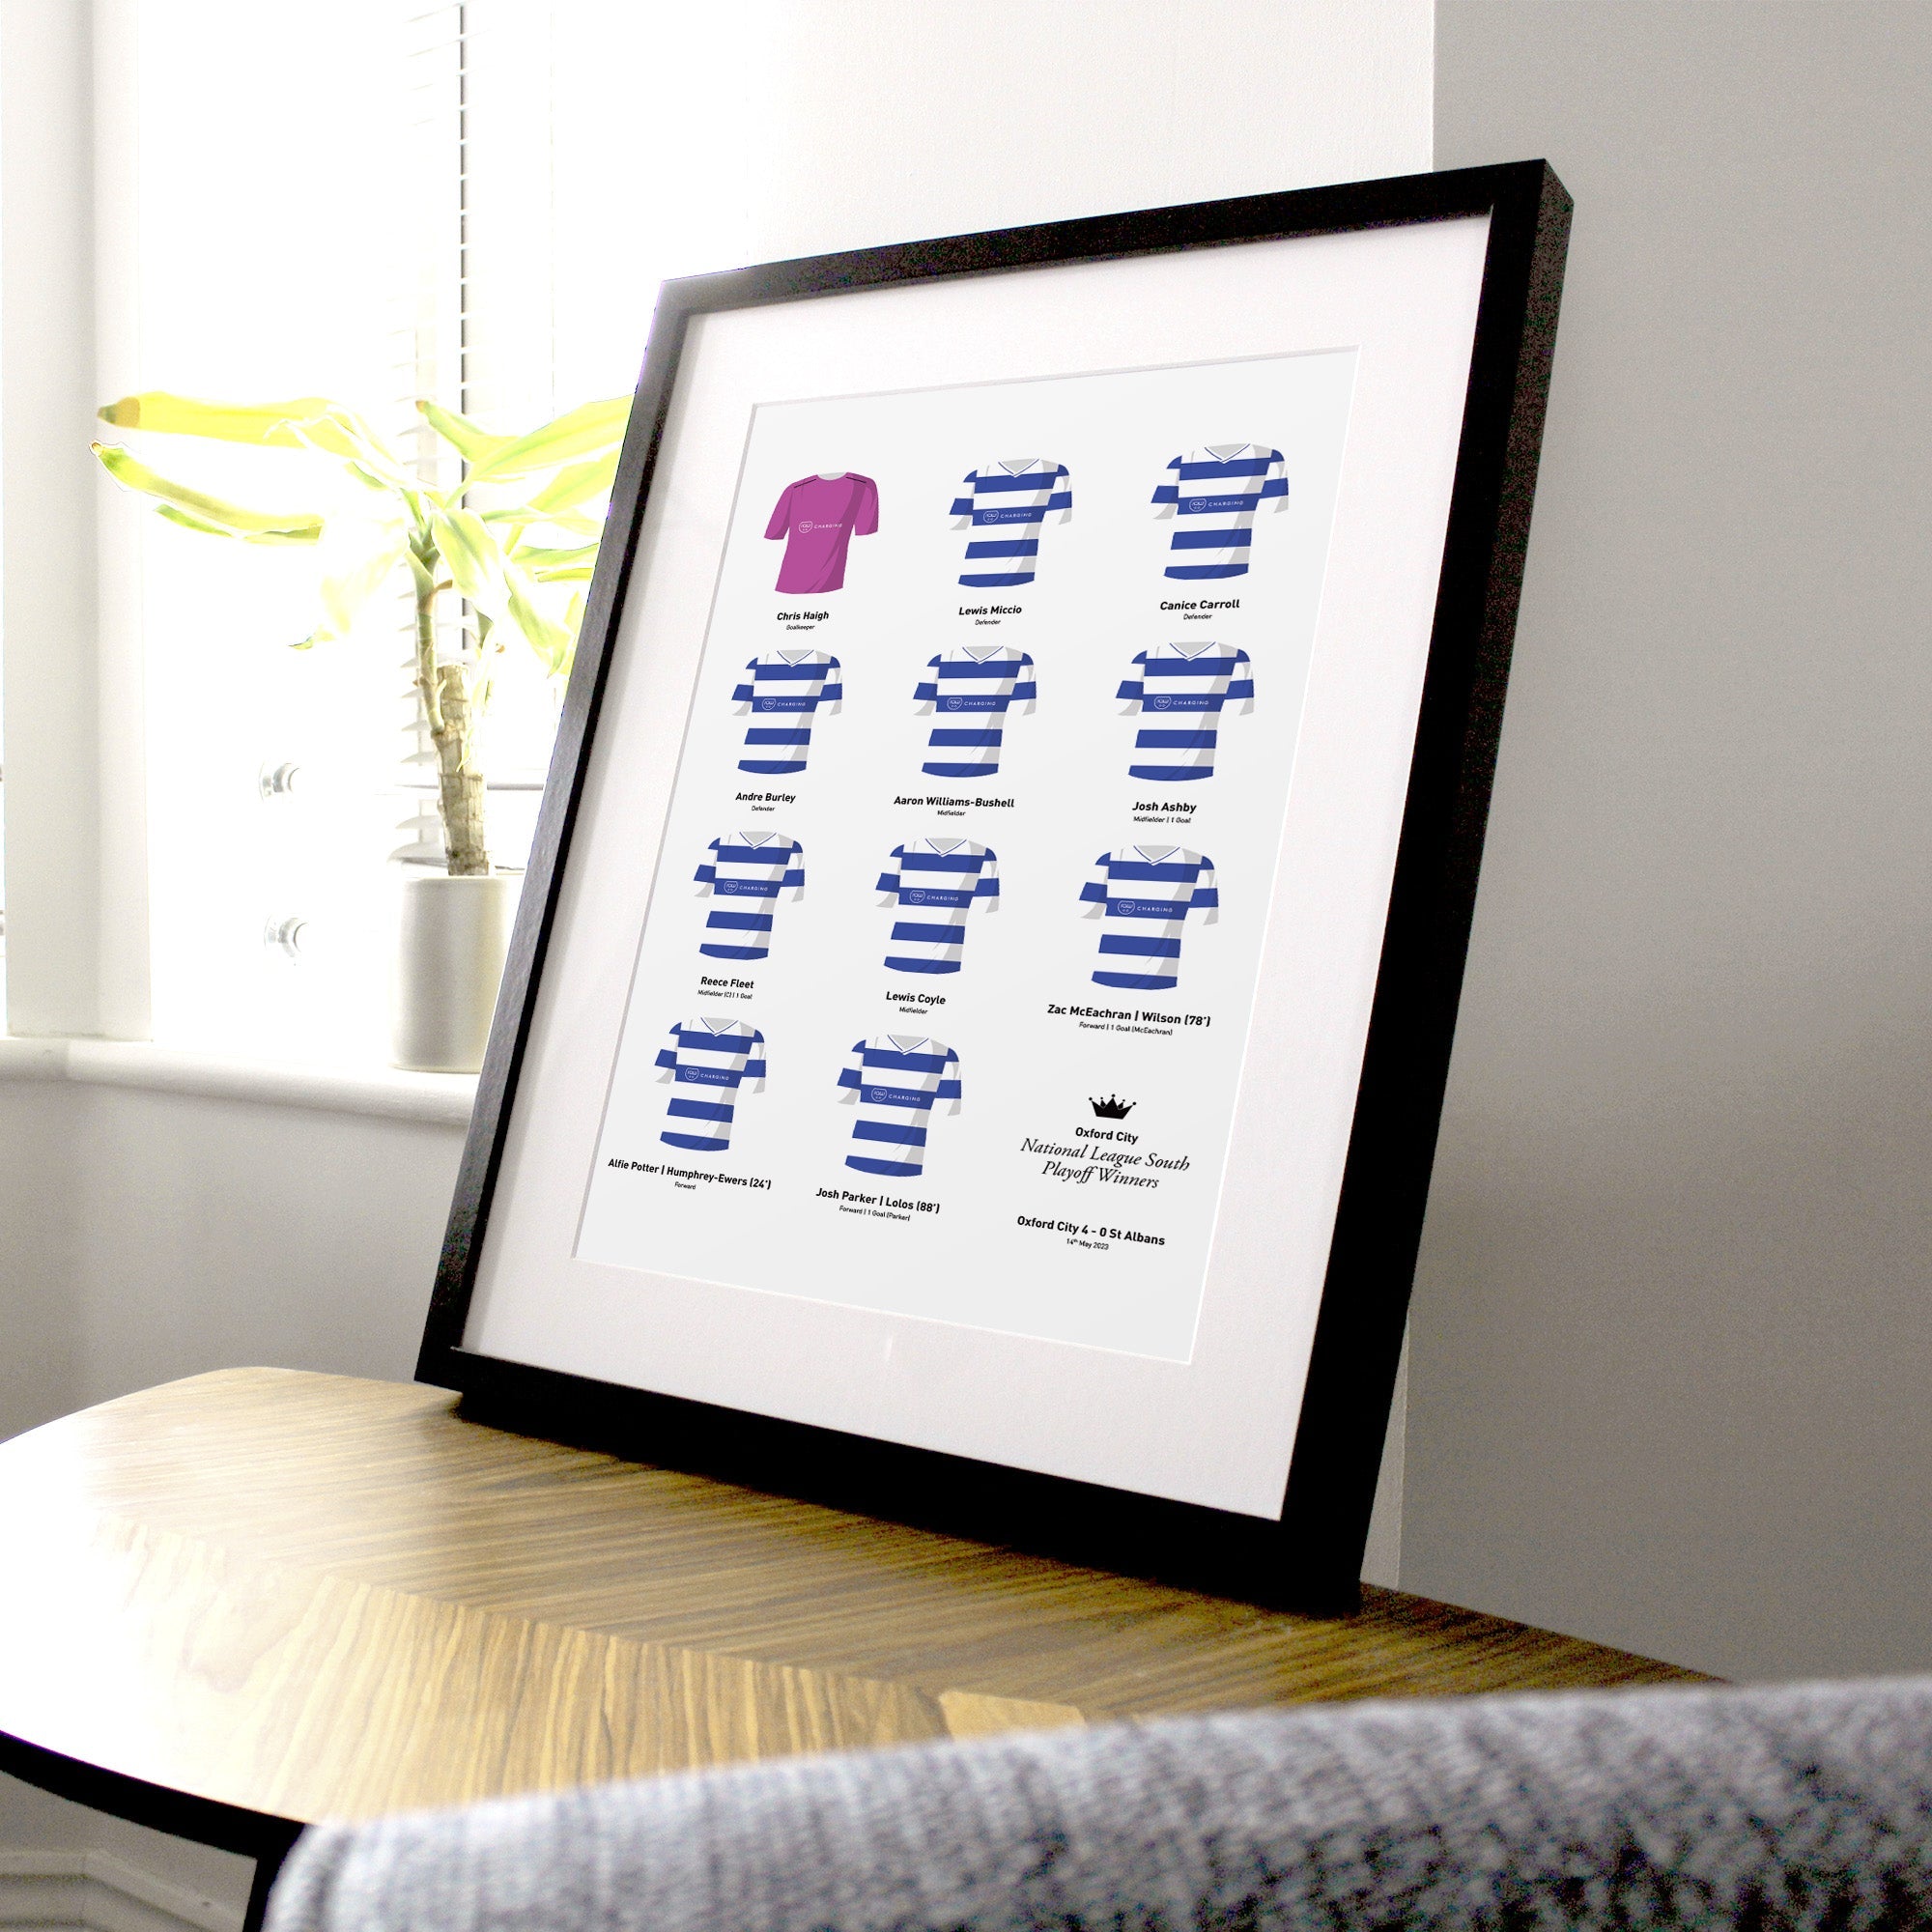 Oxford City 2023 National League South Playoff Winners Football Team Print Good Team On Paper